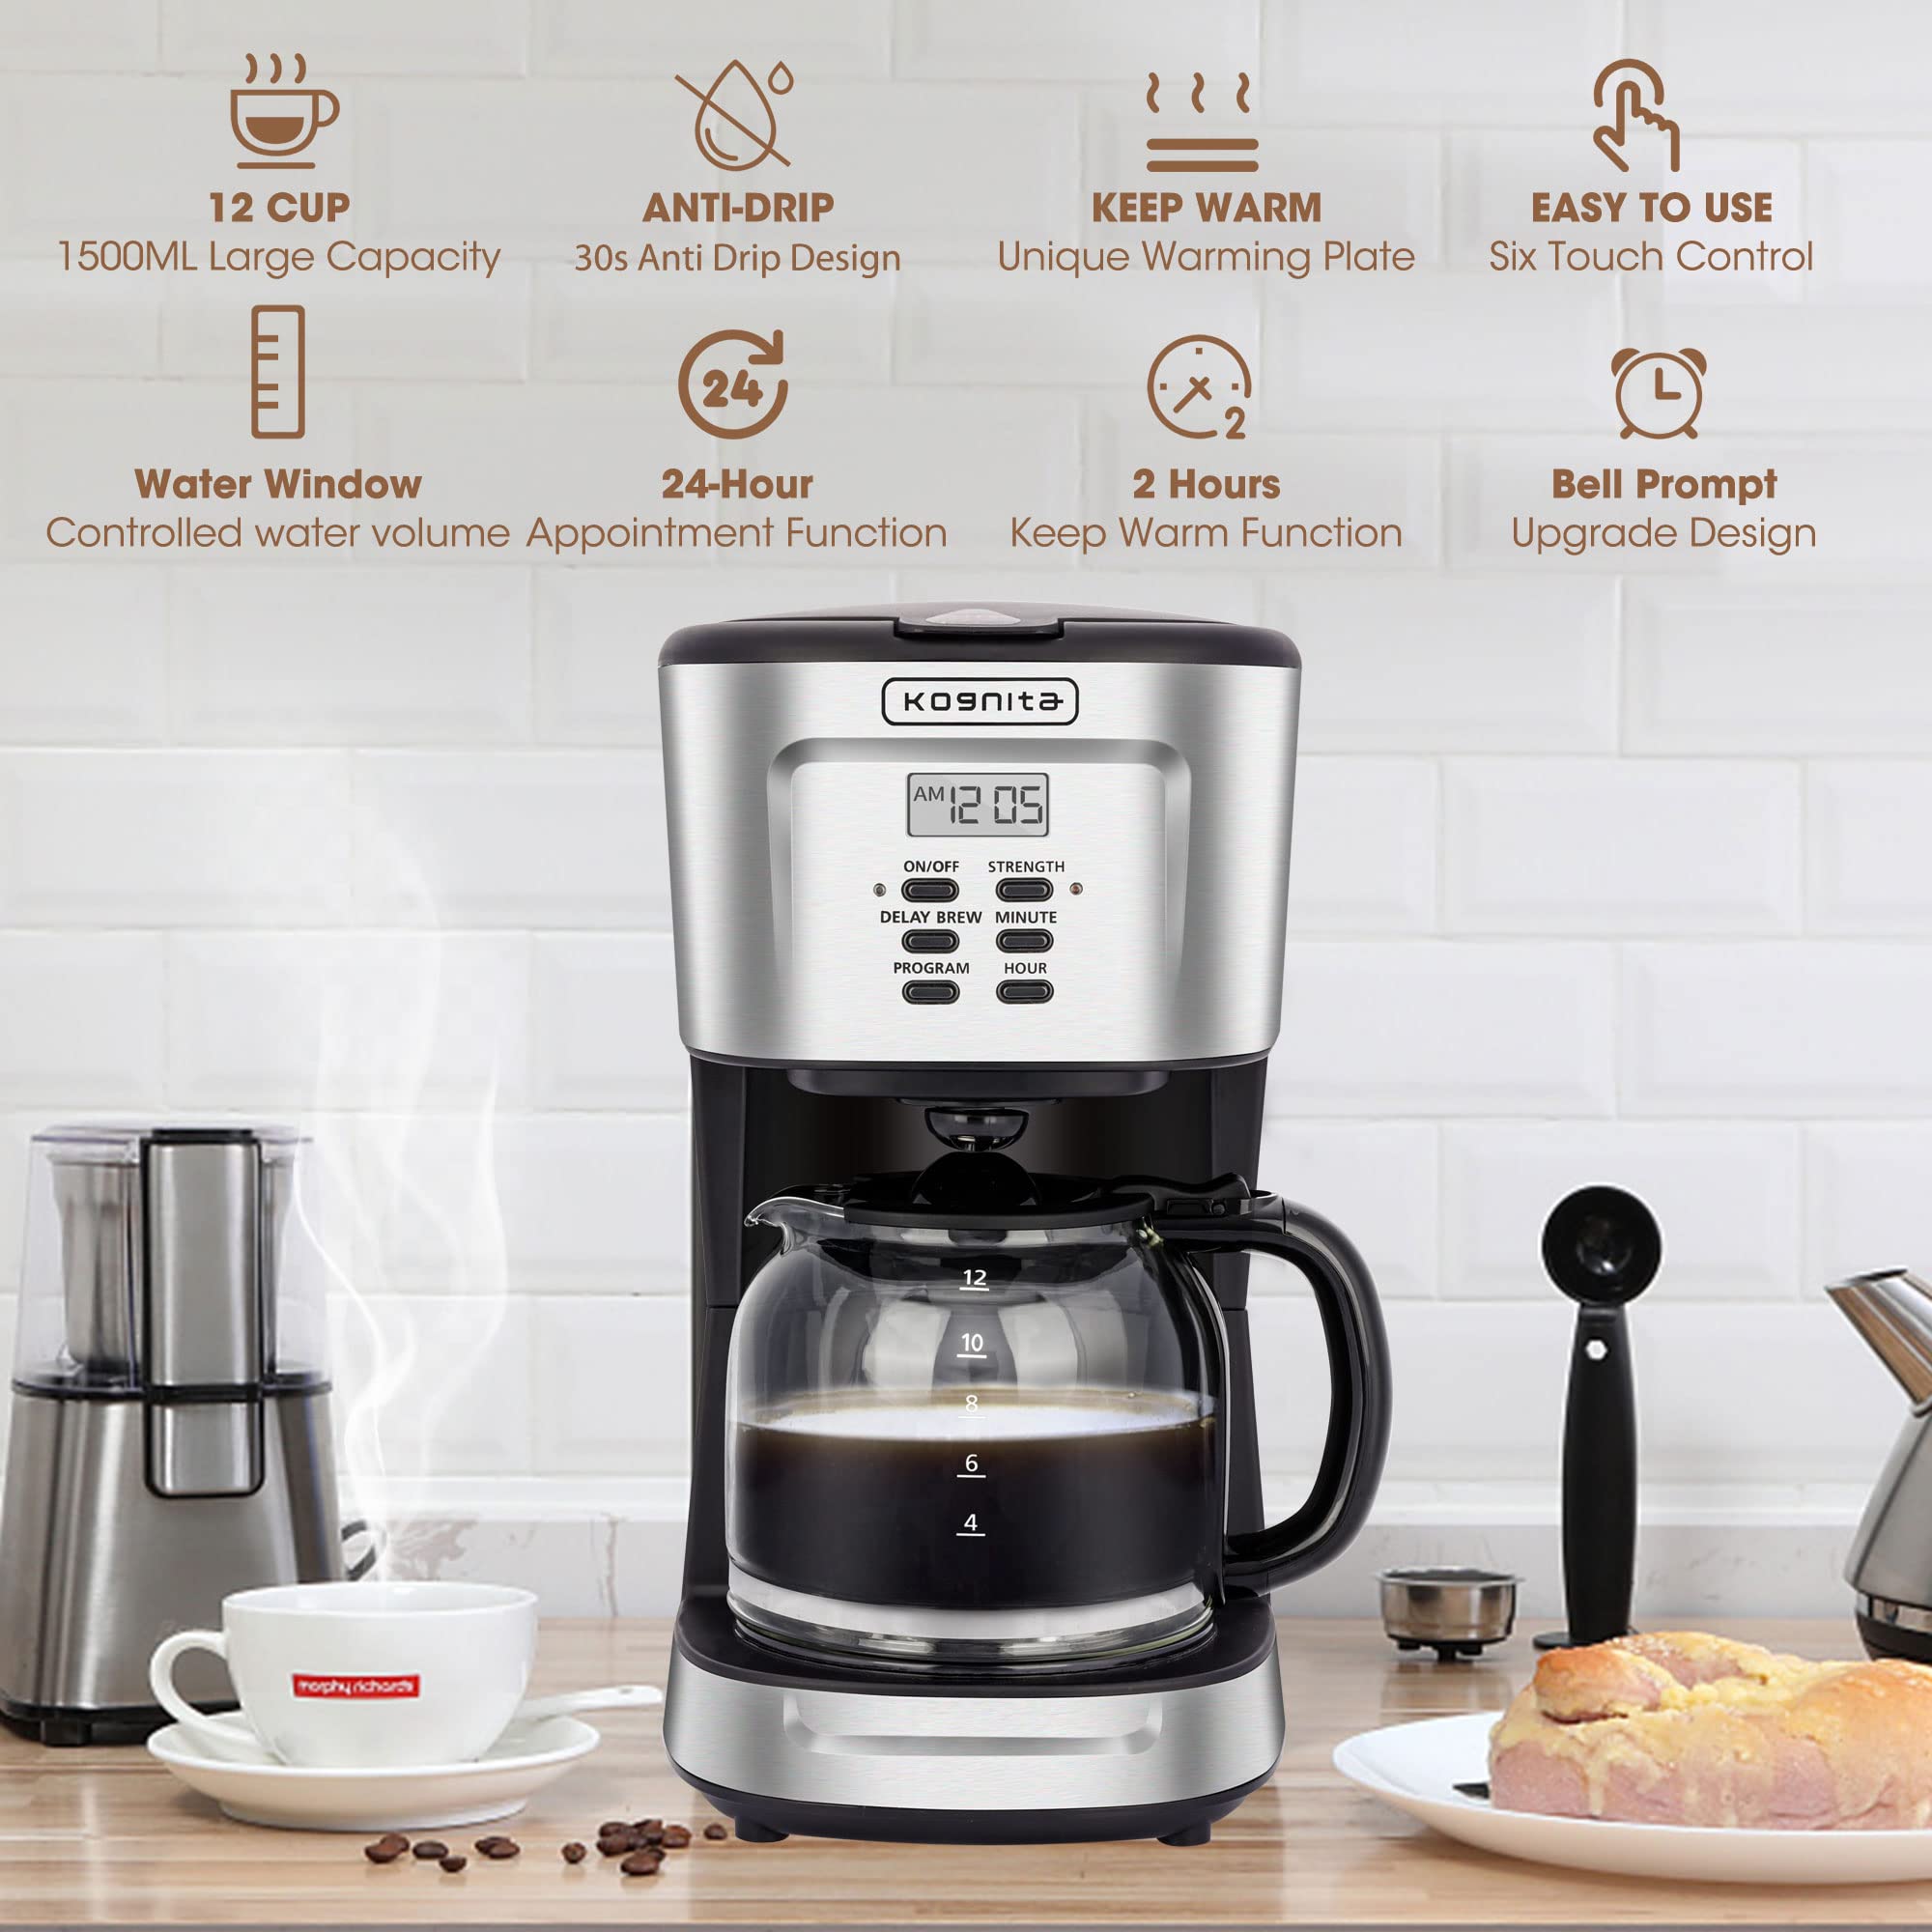 Kognita 12 Cup Coffee Maker, Programmable Small Coffee Maker with Glass Carafe and Filter, Dirp Coffee Maker Coffee Pot Machine, Keep Warm, Brew Strength Control, 900W Fast Brew Auto Shut Off, Stainless Steel